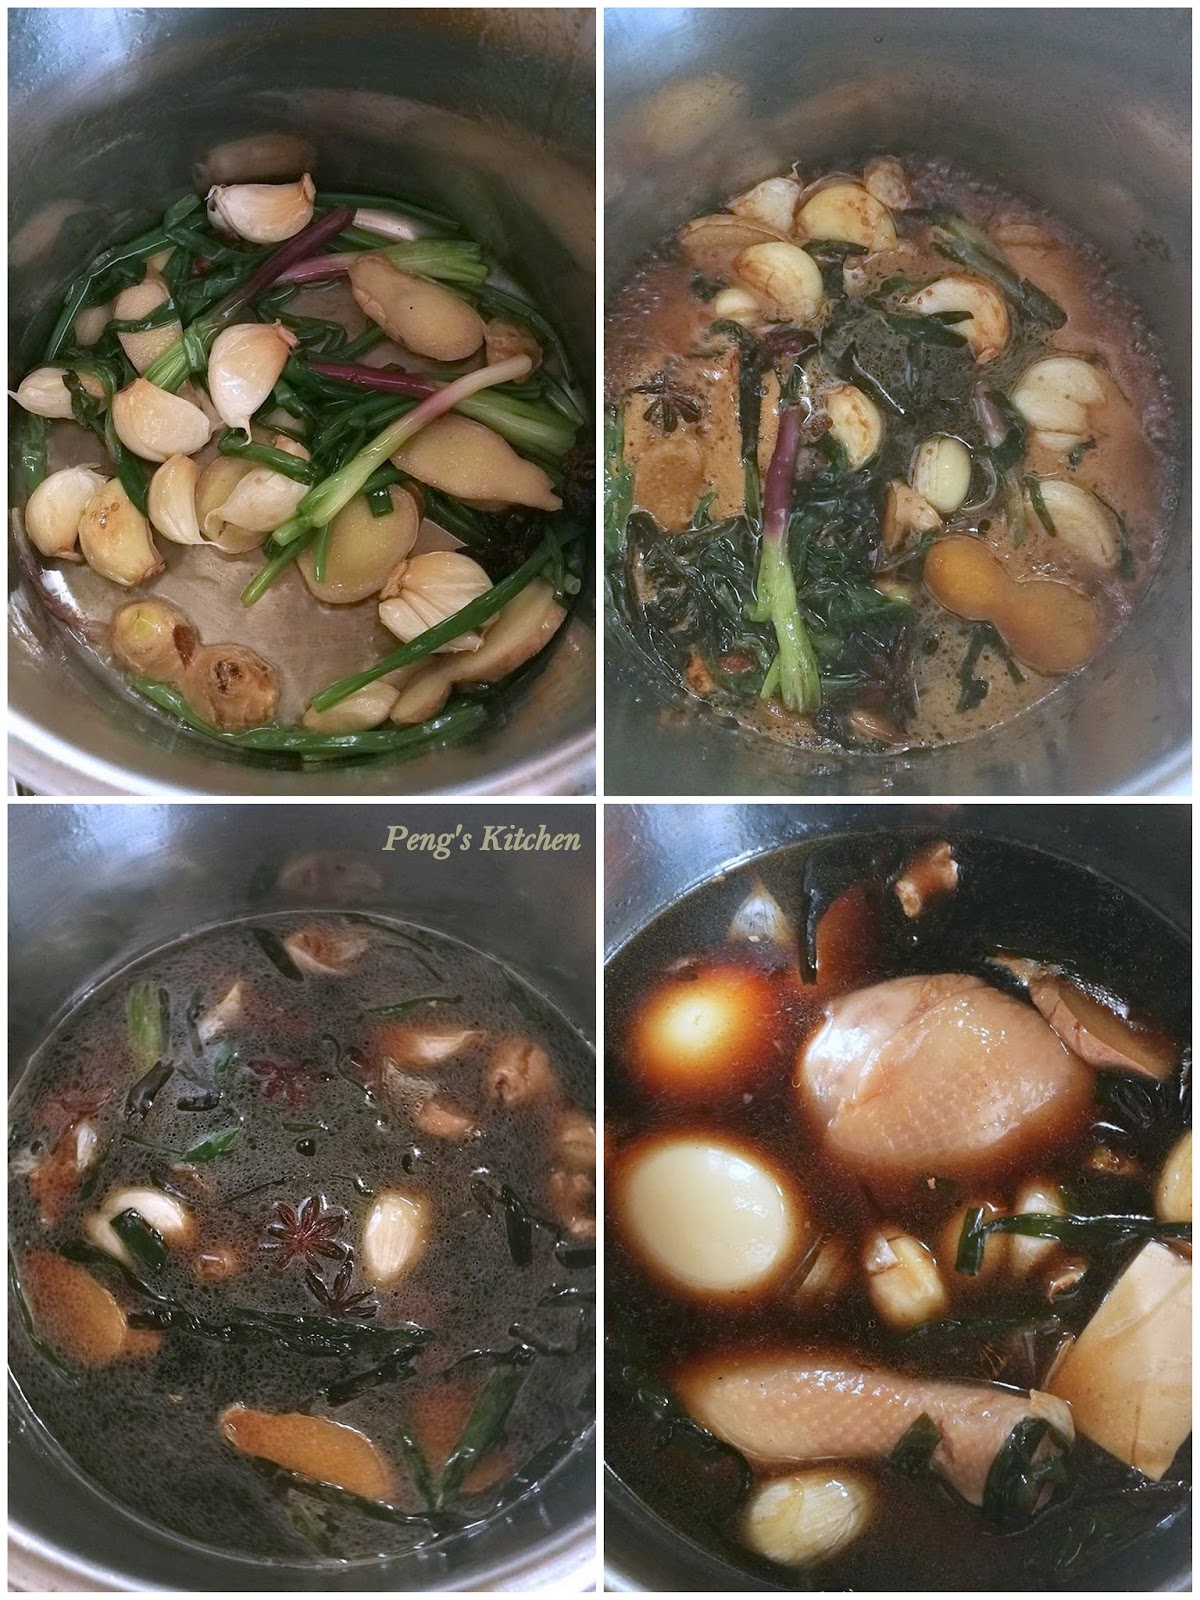 Thermal Cooker Recipes